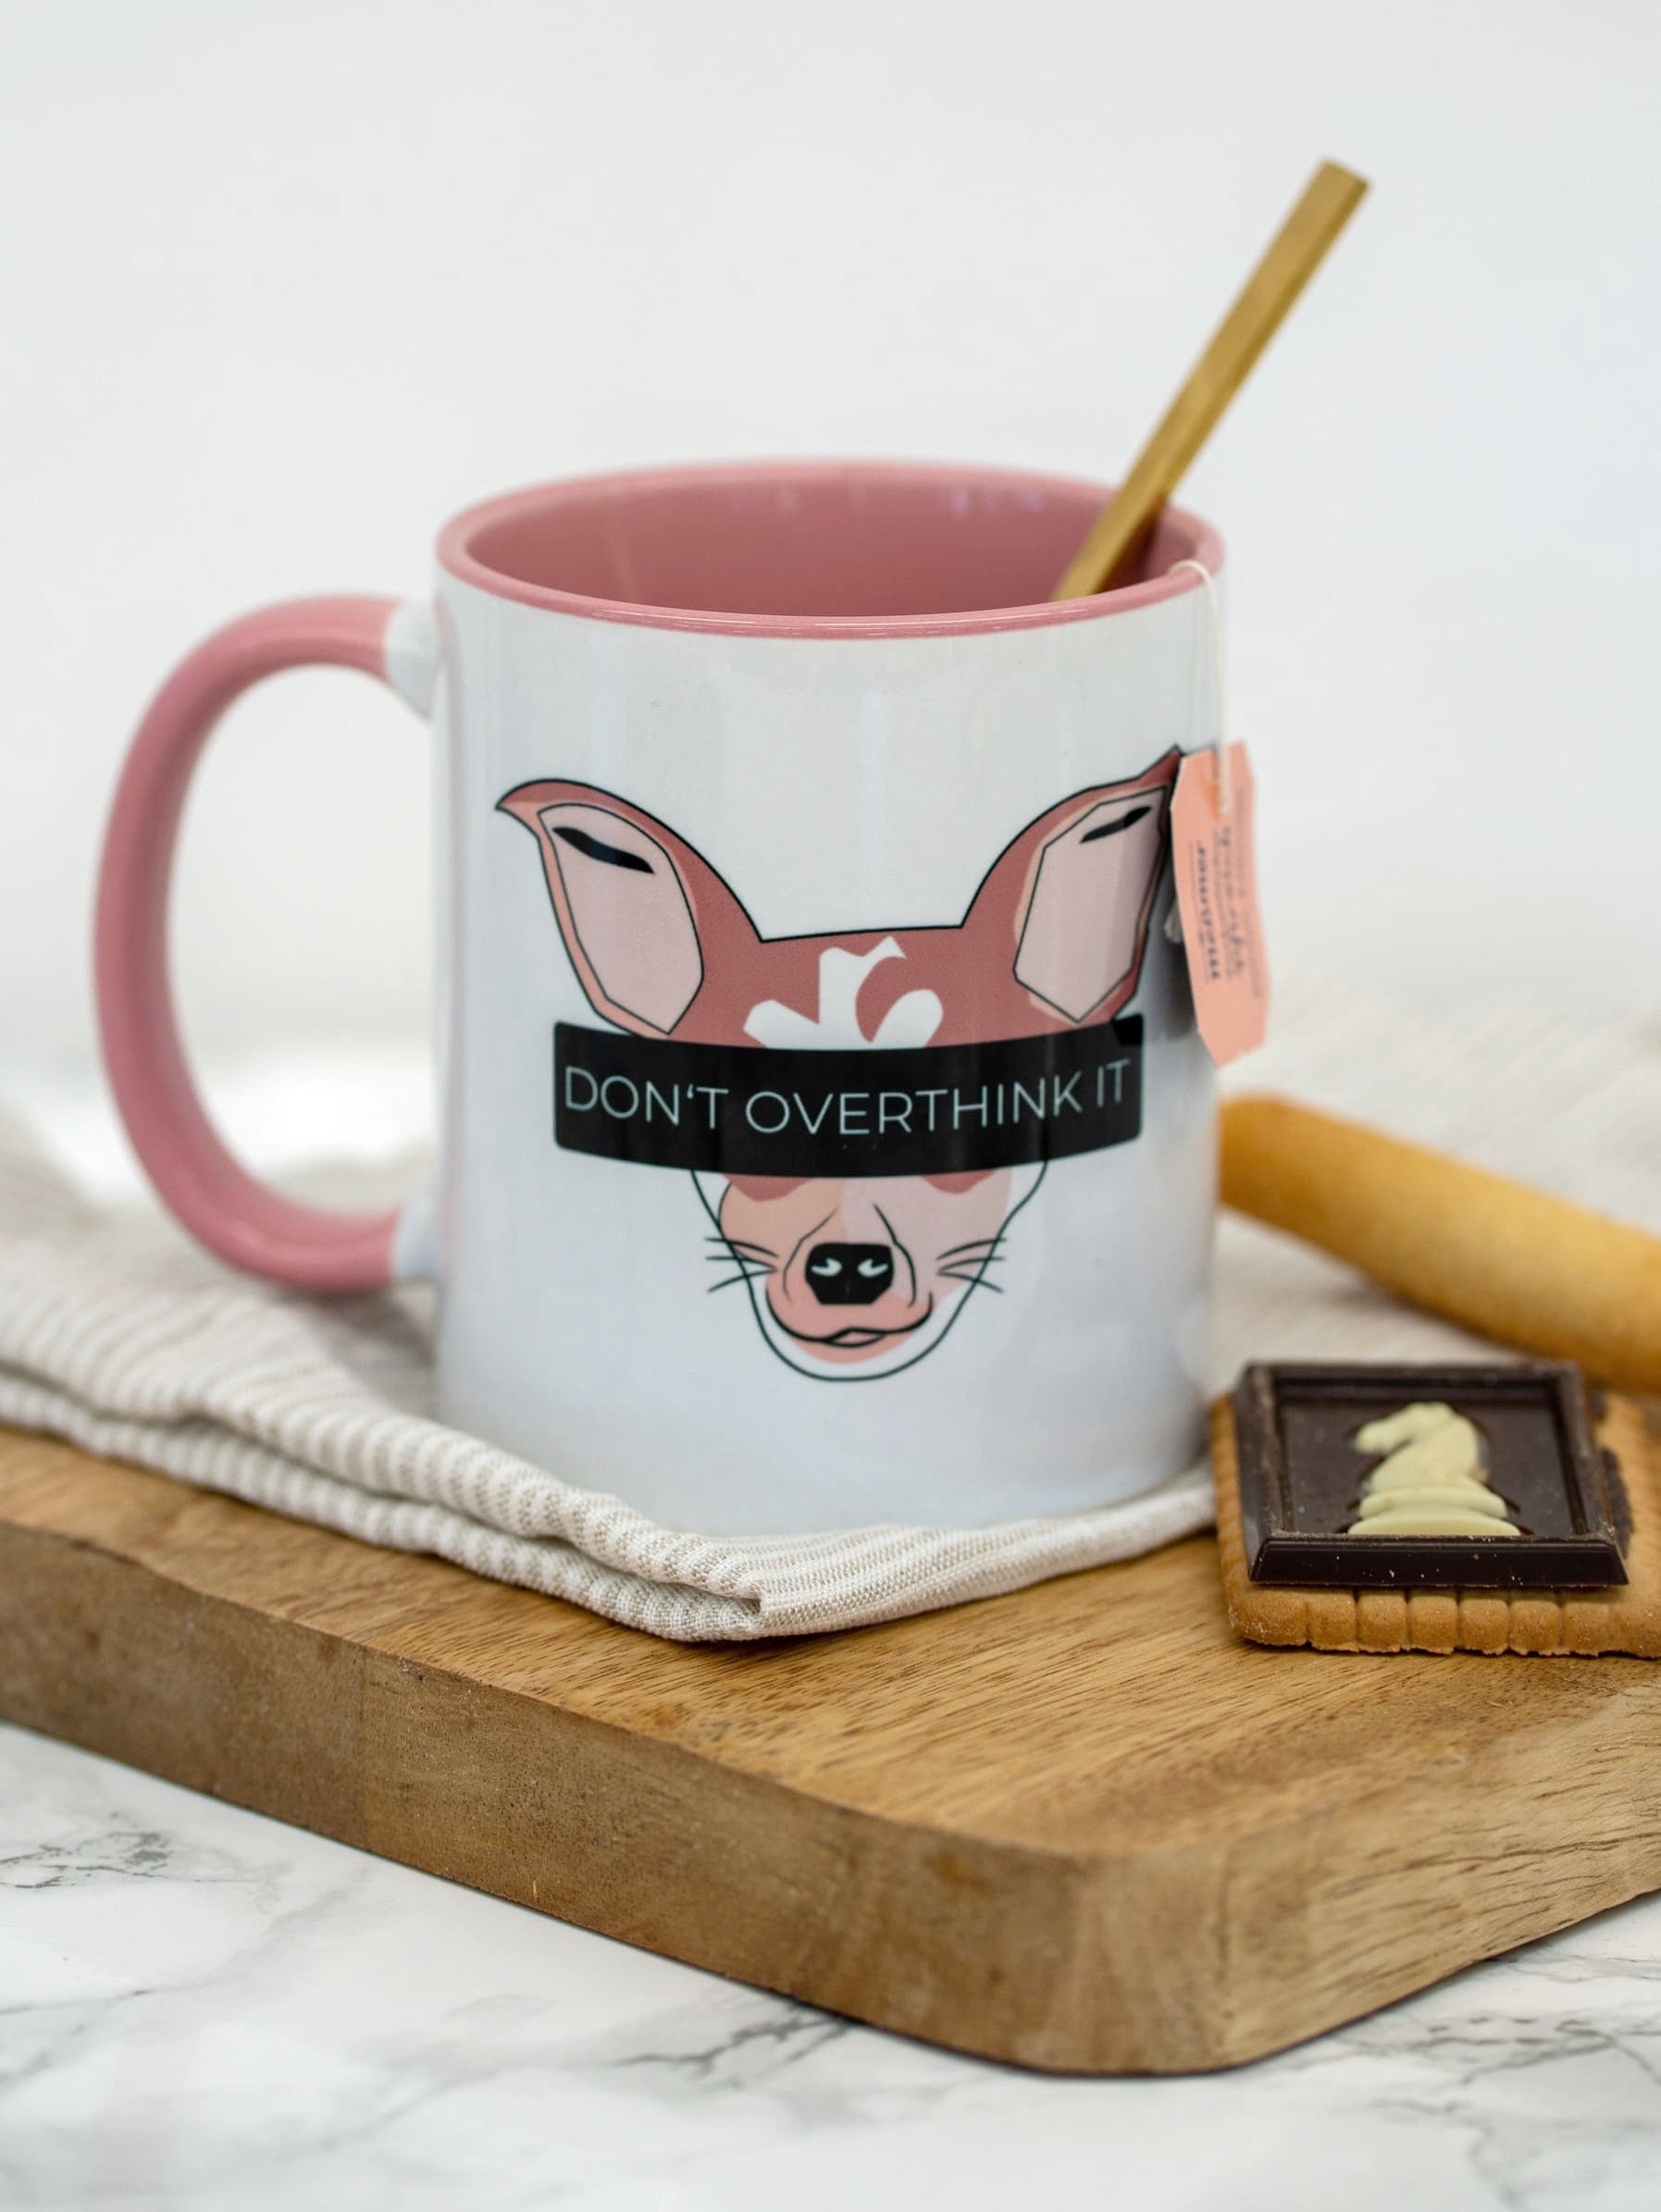 Don't overthink it - Tasse - Limited Edition!